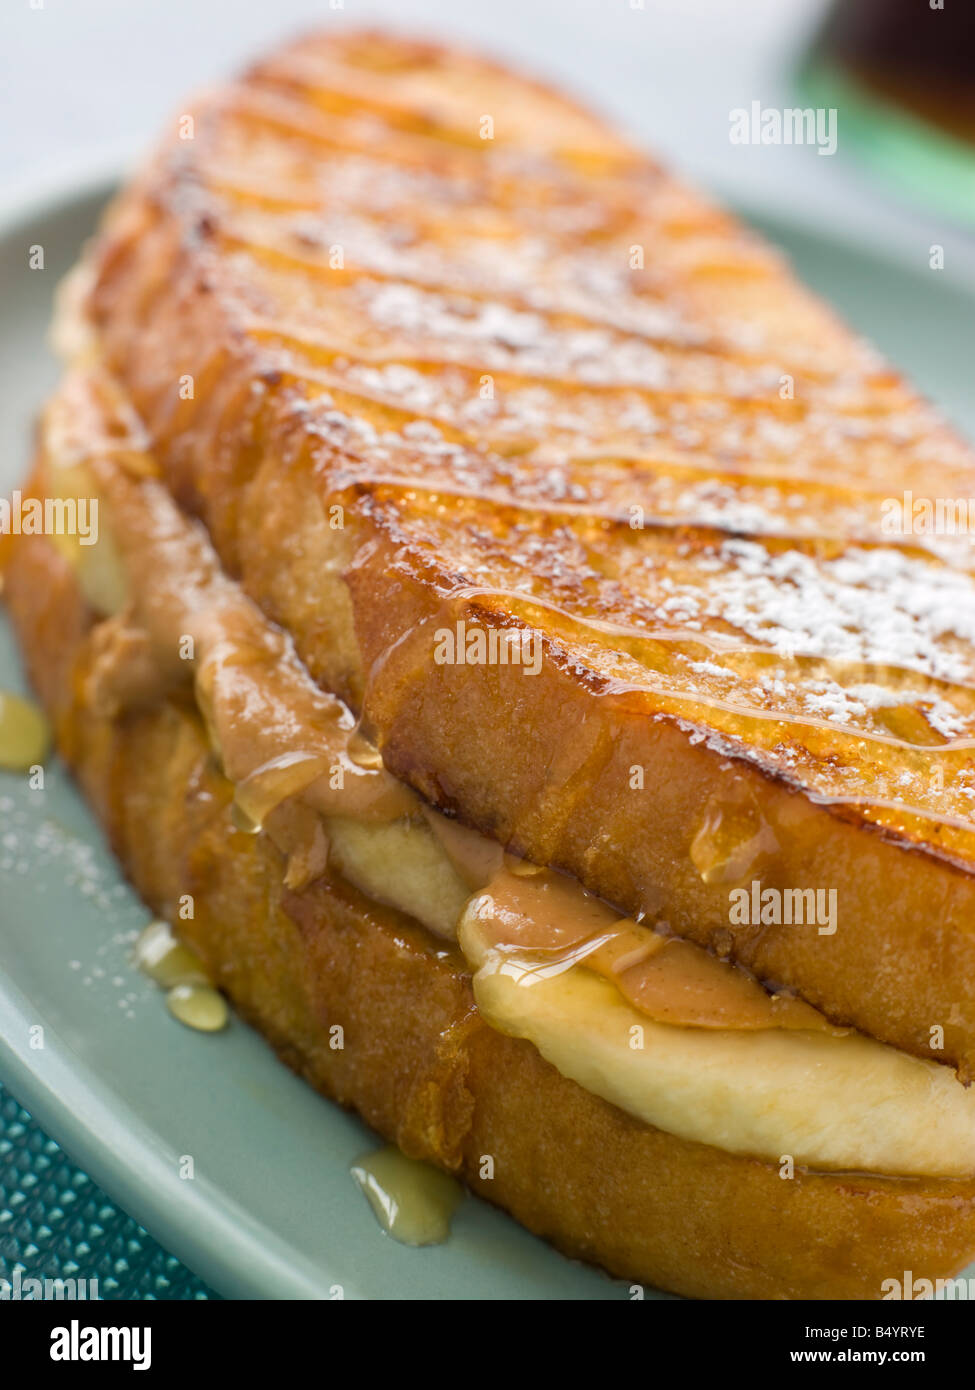 Peanut Butter And Banana Eggy Bread Sandwich With Syrup Stock Photo